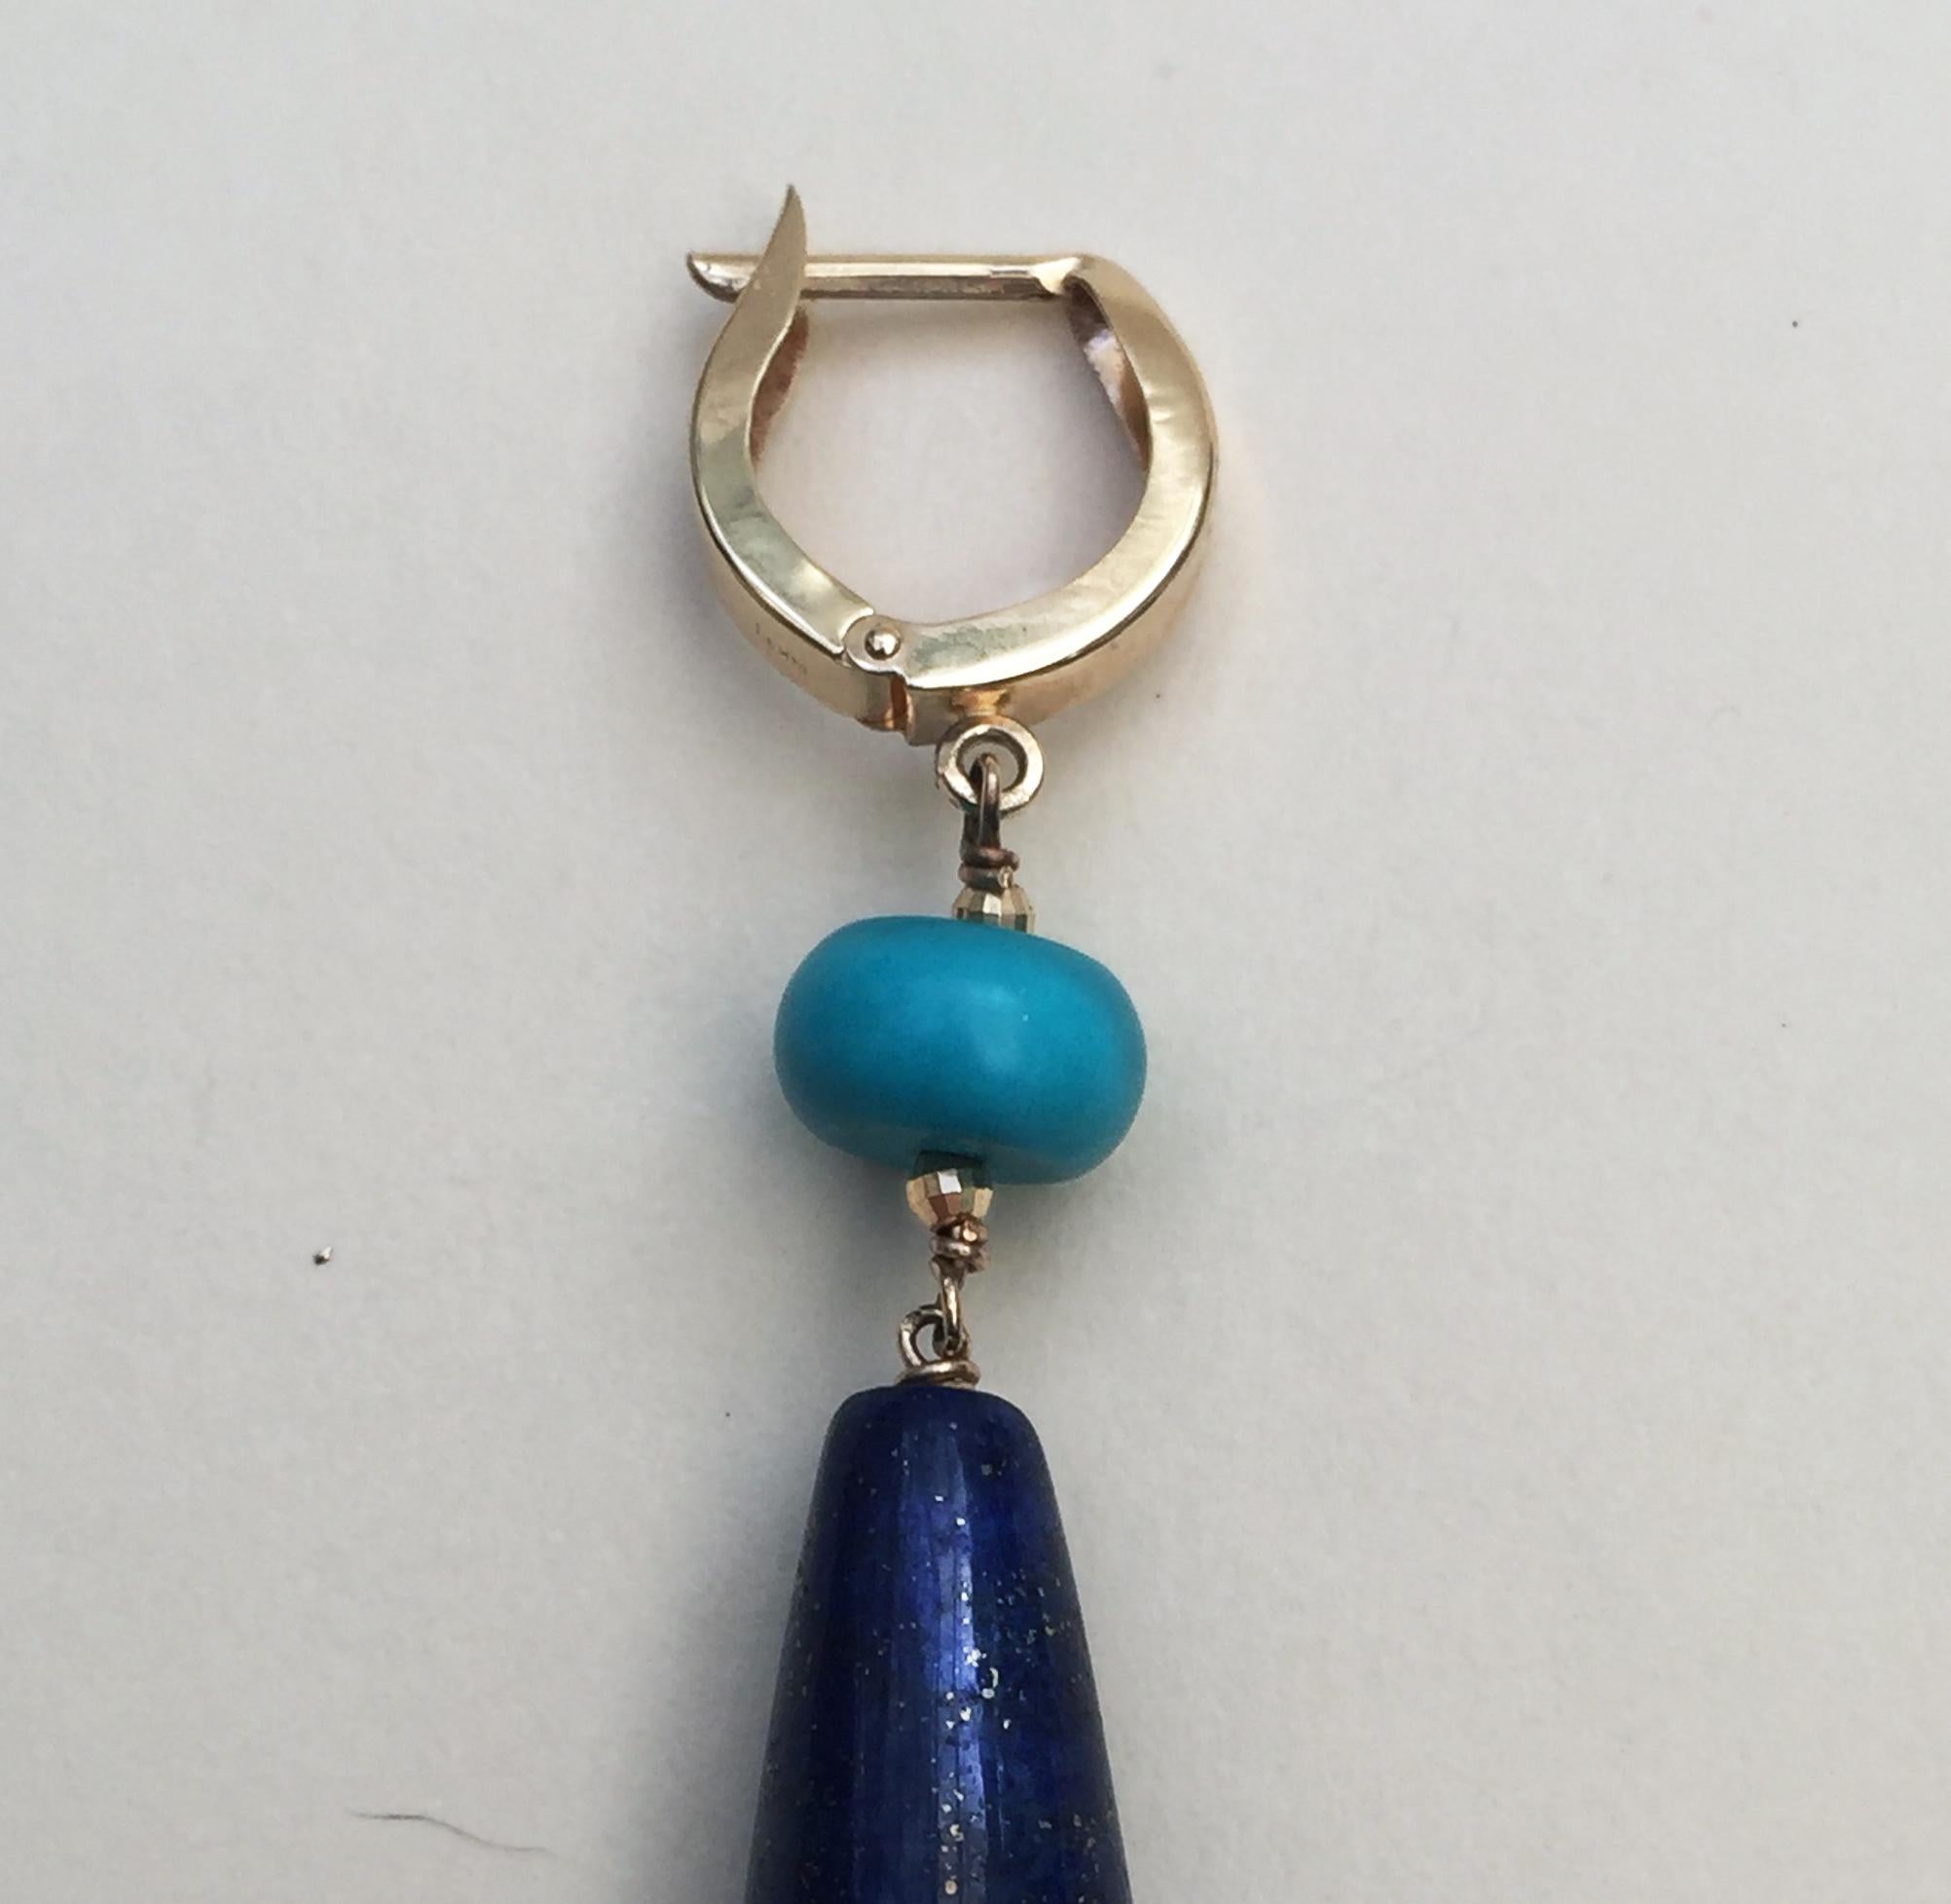 Artist Marina J Lapis Lazuli and Turquoise Earrings with 14K Yellow Gold